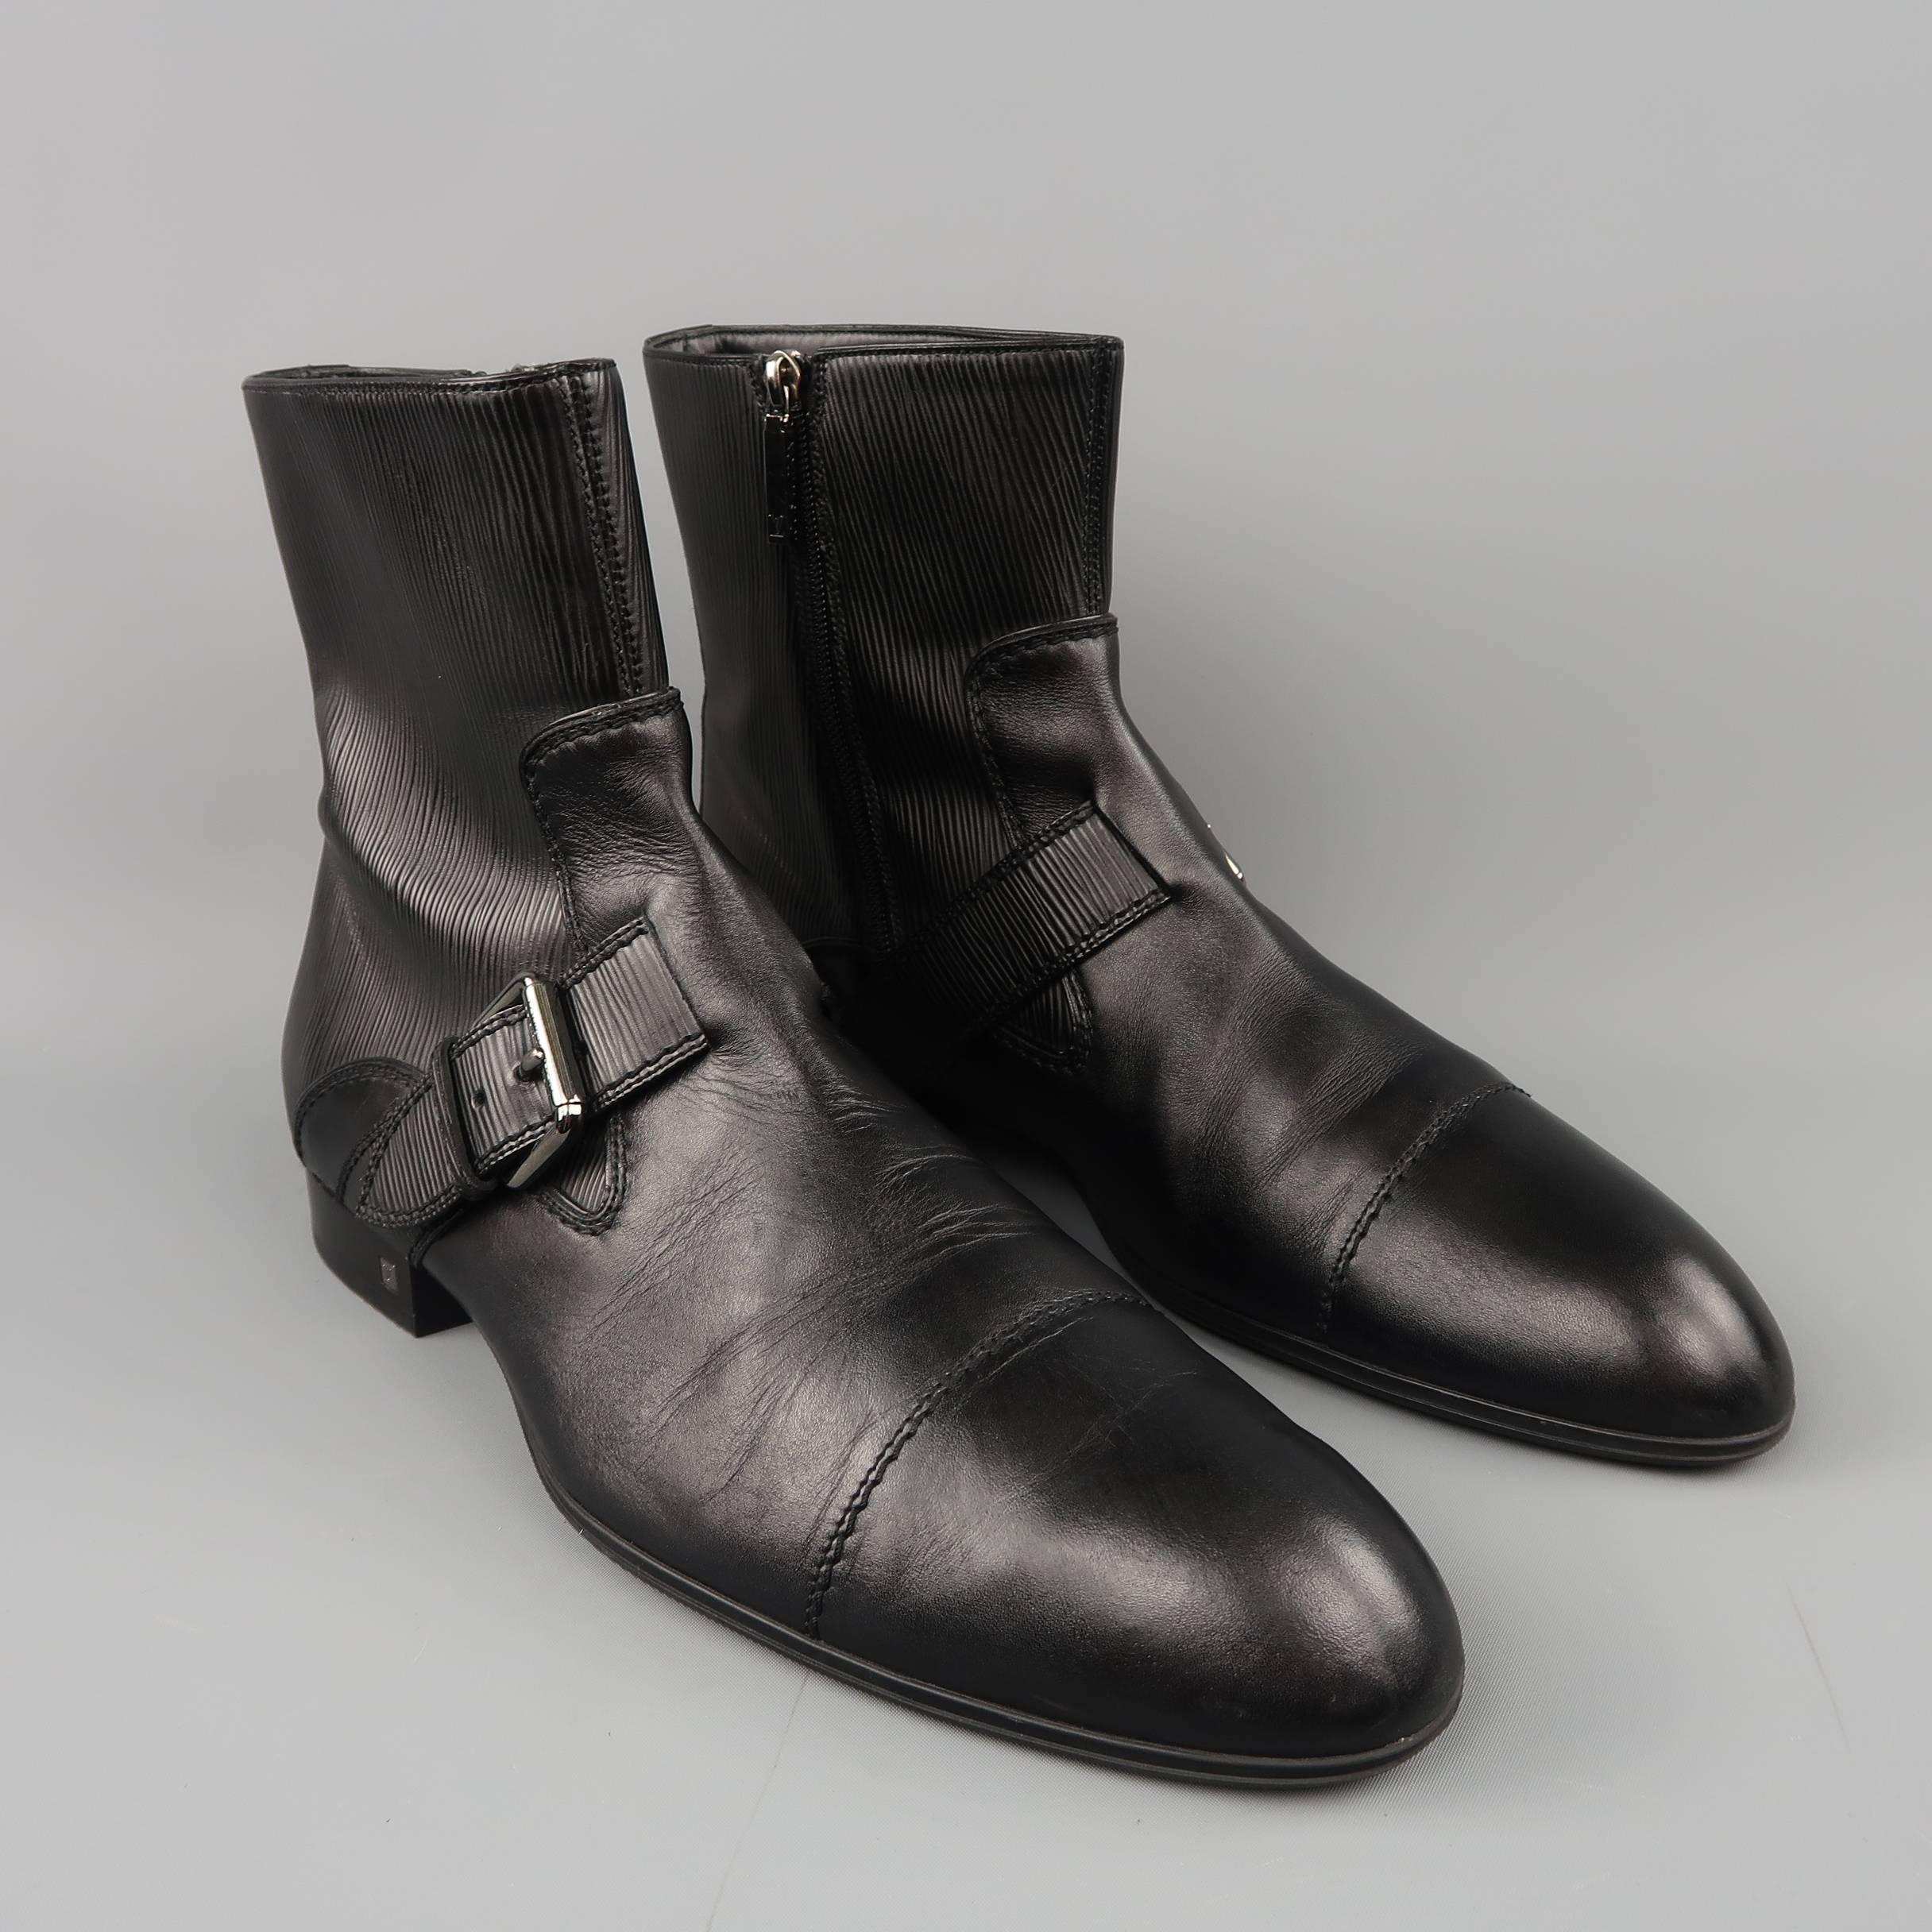 LOUIS VUITTON ankle boots come in smooth black leather with a round pointed cap toe, ankle strap with silver tone buckle, Epi textured leather panel and silver tone monogram emblem heel. Made in Italy.
 
Excellent Pre-Owned Condition.
Marked: UK